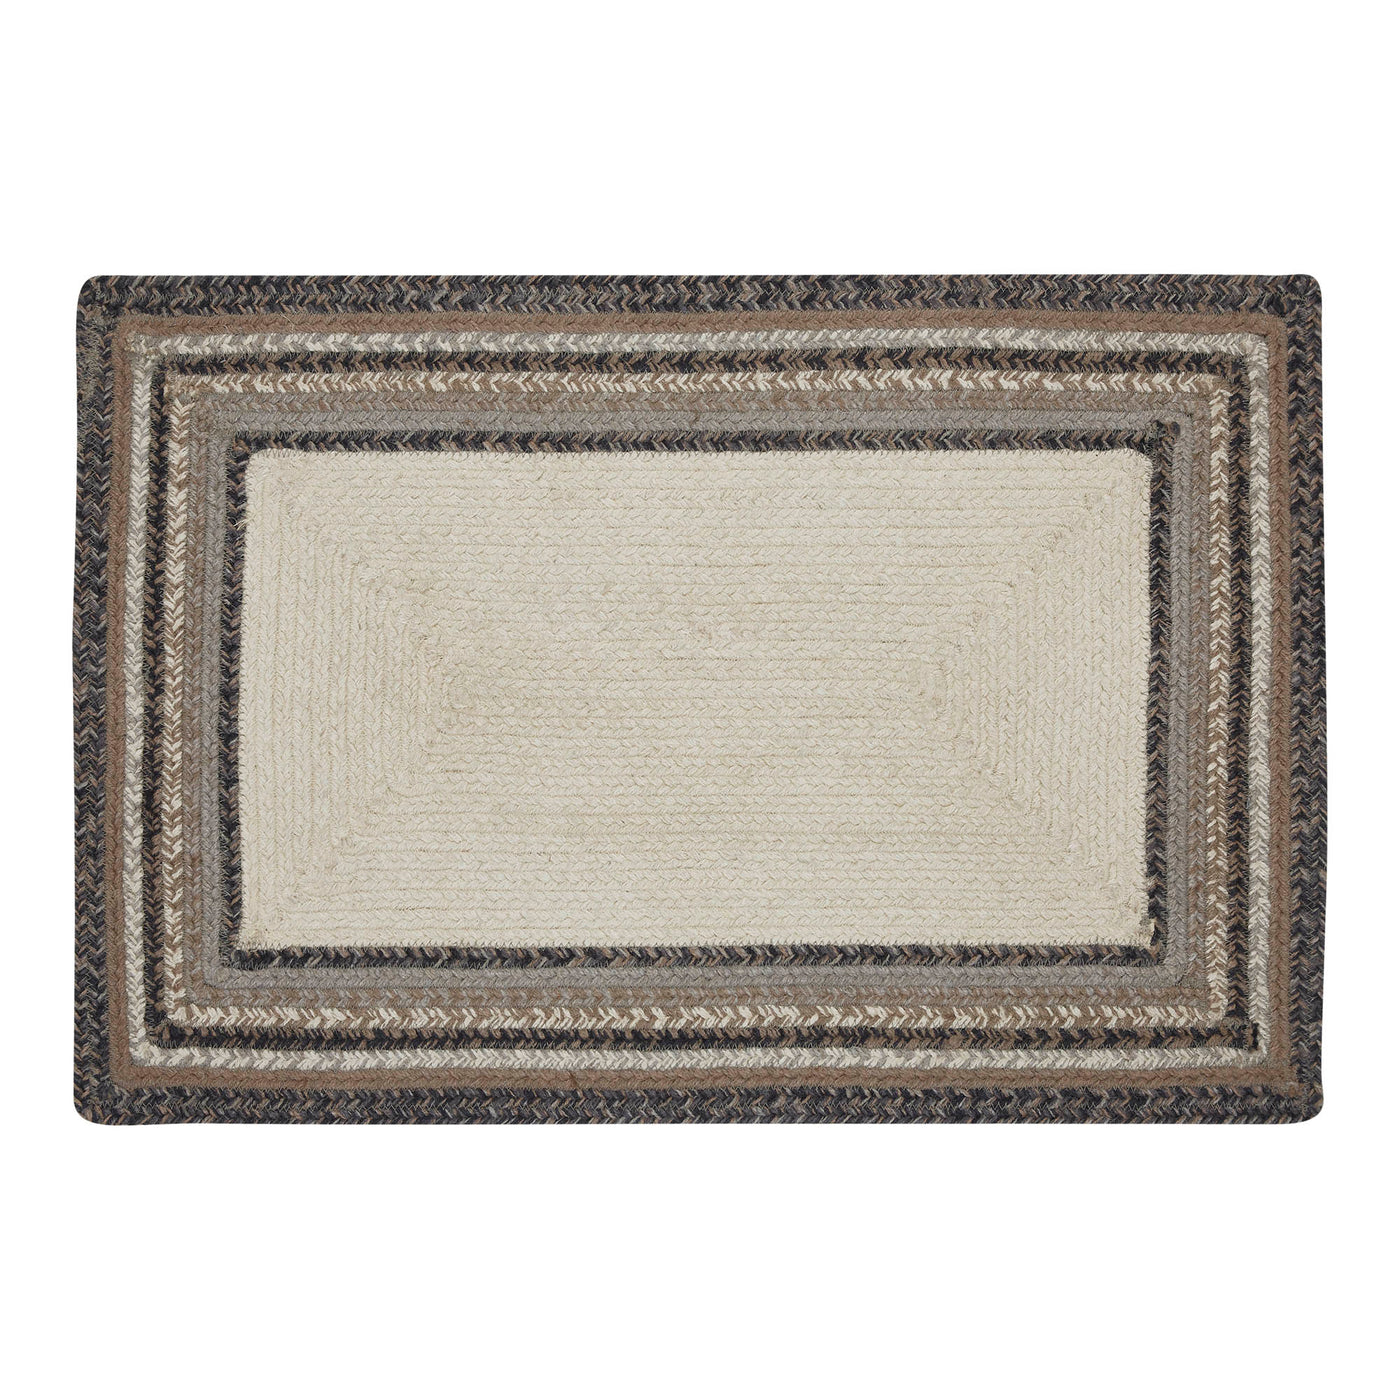 Floral Vine Welcome Rectangle Jute Rug with Pad 20'' x 30''